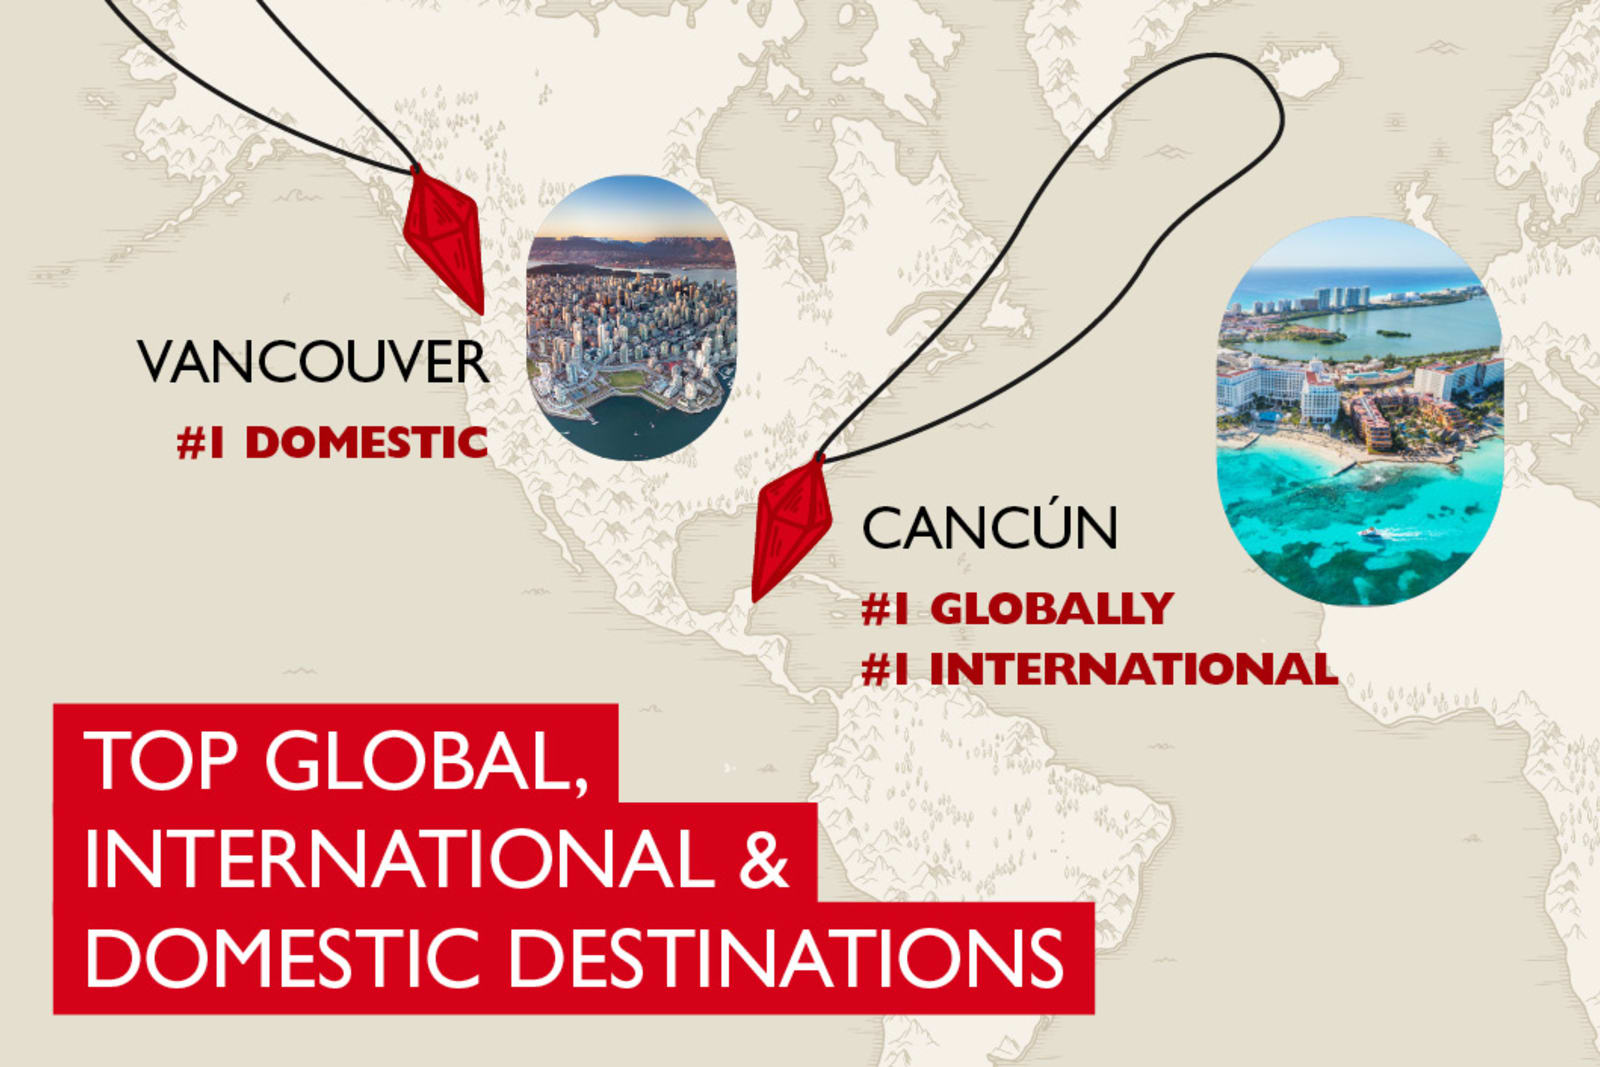 Vancouver and Cancún were among the most popular flight destinations for 2023